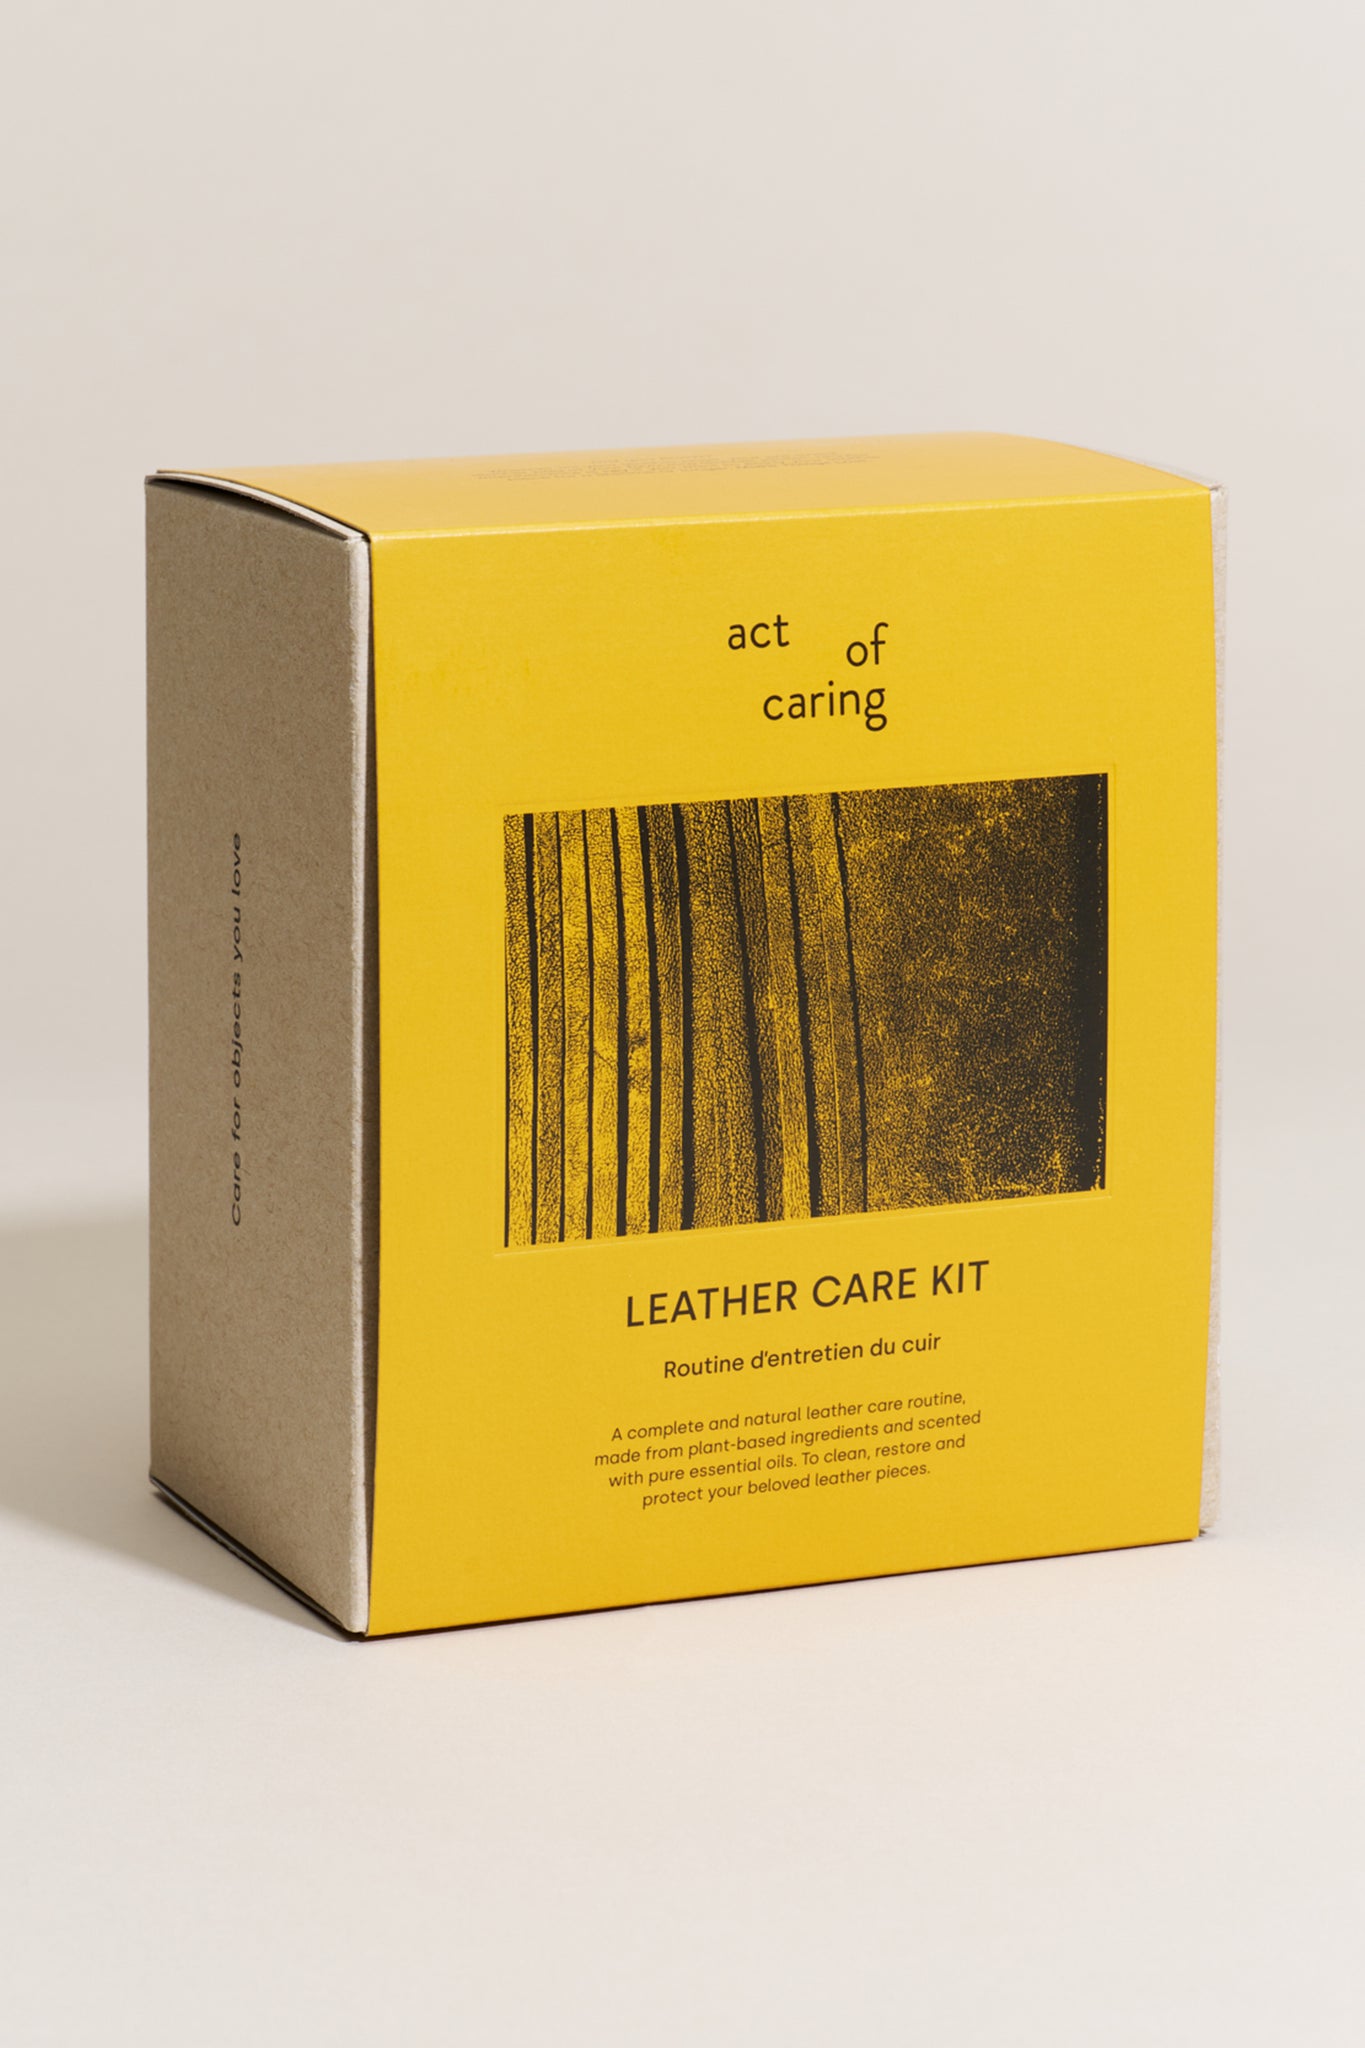 Leather Care Kit by Act of Caring